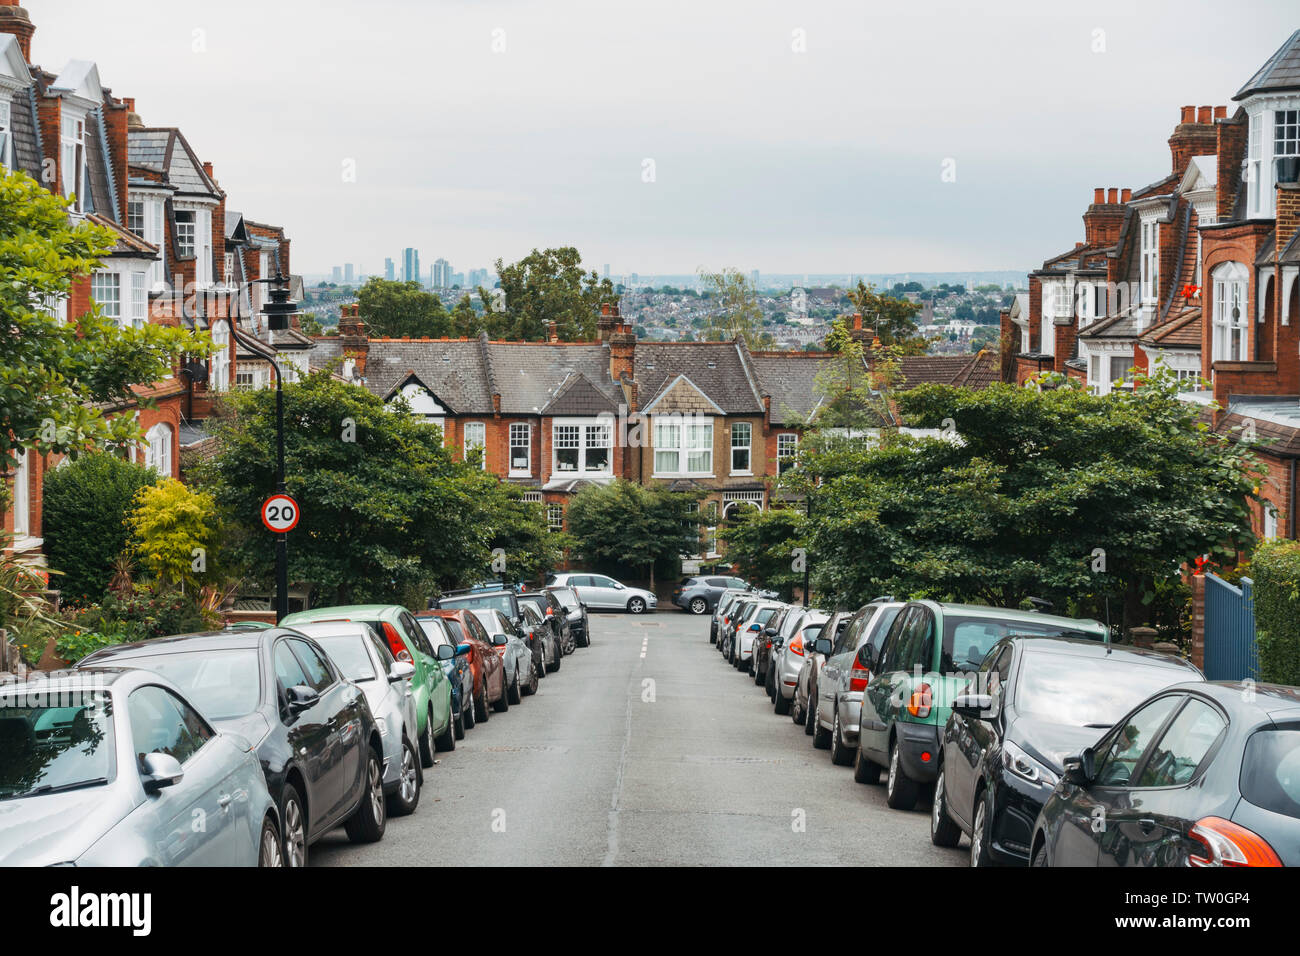 Looking down the peaceful terrace-housed streets of Muswell Hill, North London, on a muggy summer's morning. London skyline is visible behind Stock Photo